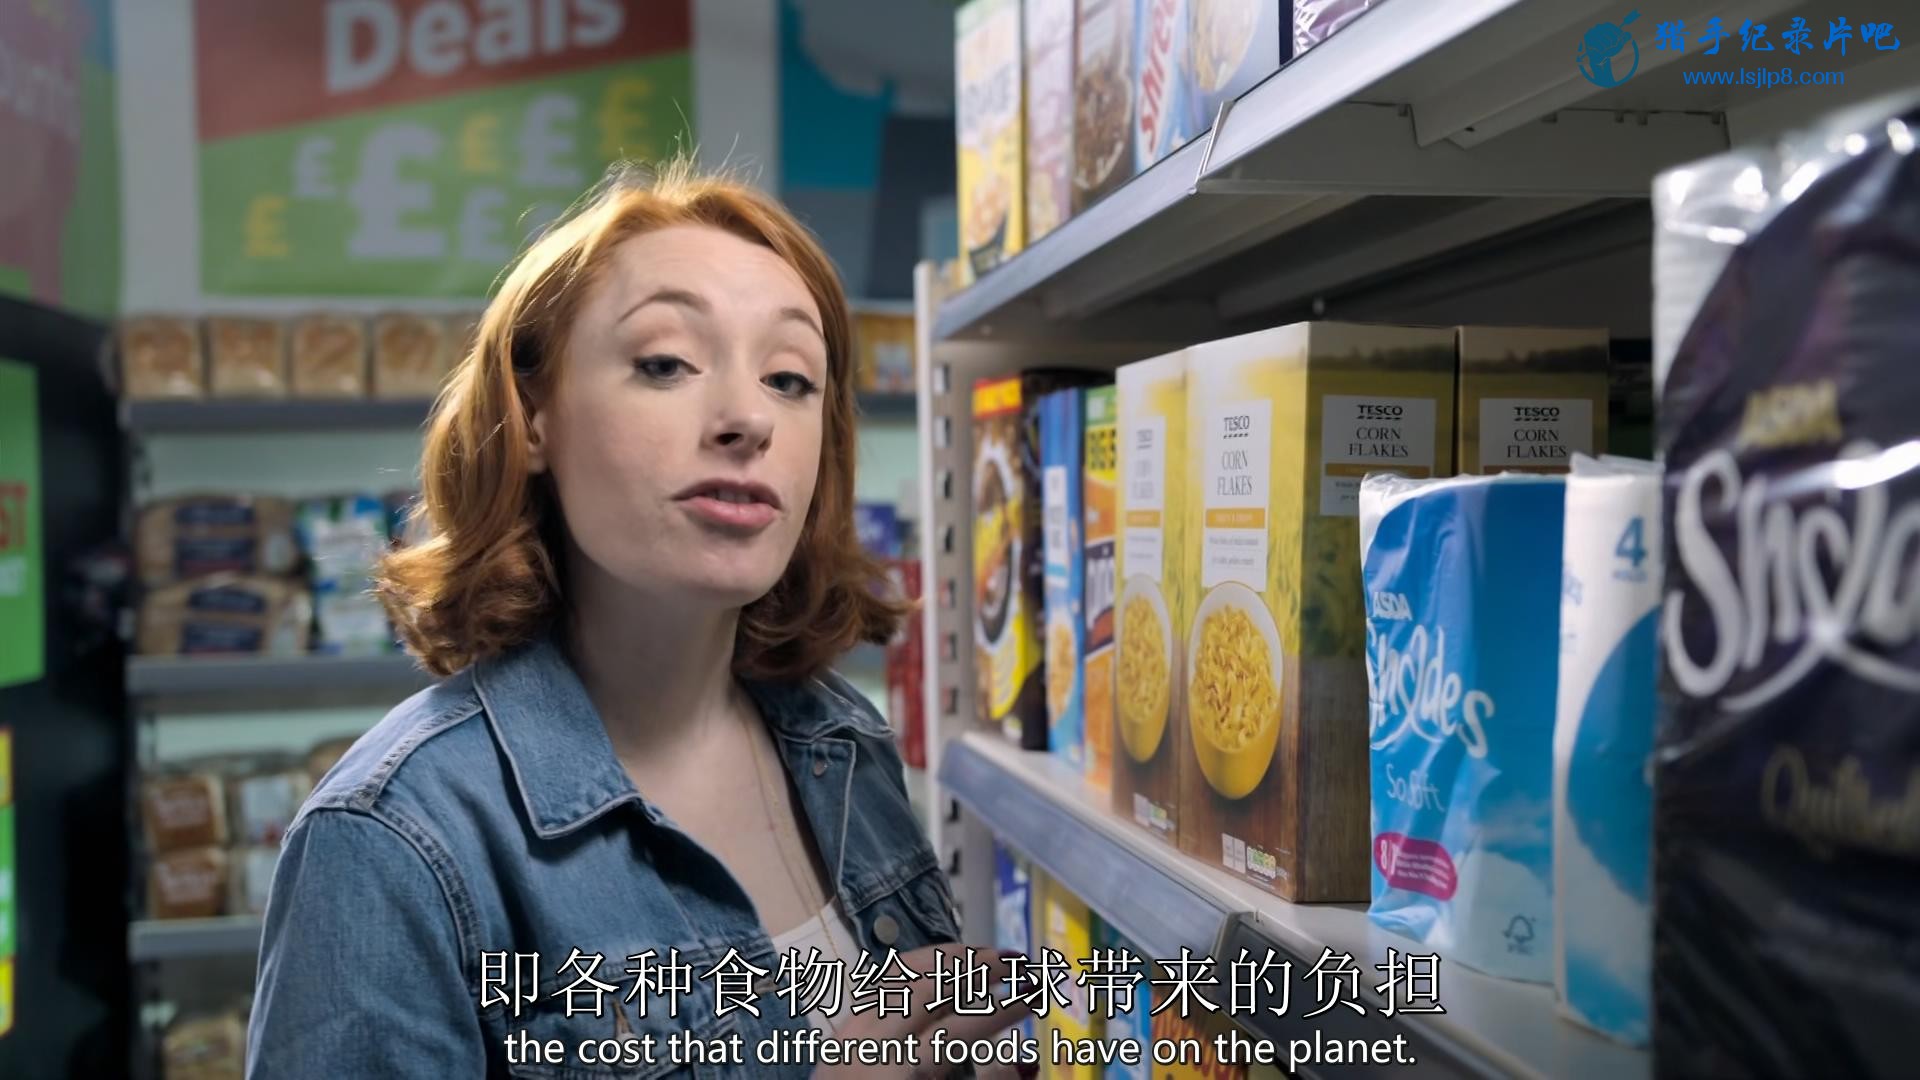 BBC.Horizon.2019.The.Honest.Supermarket.Whats.Really.in.Our.Food.1080p.HDTV.x265.jpg